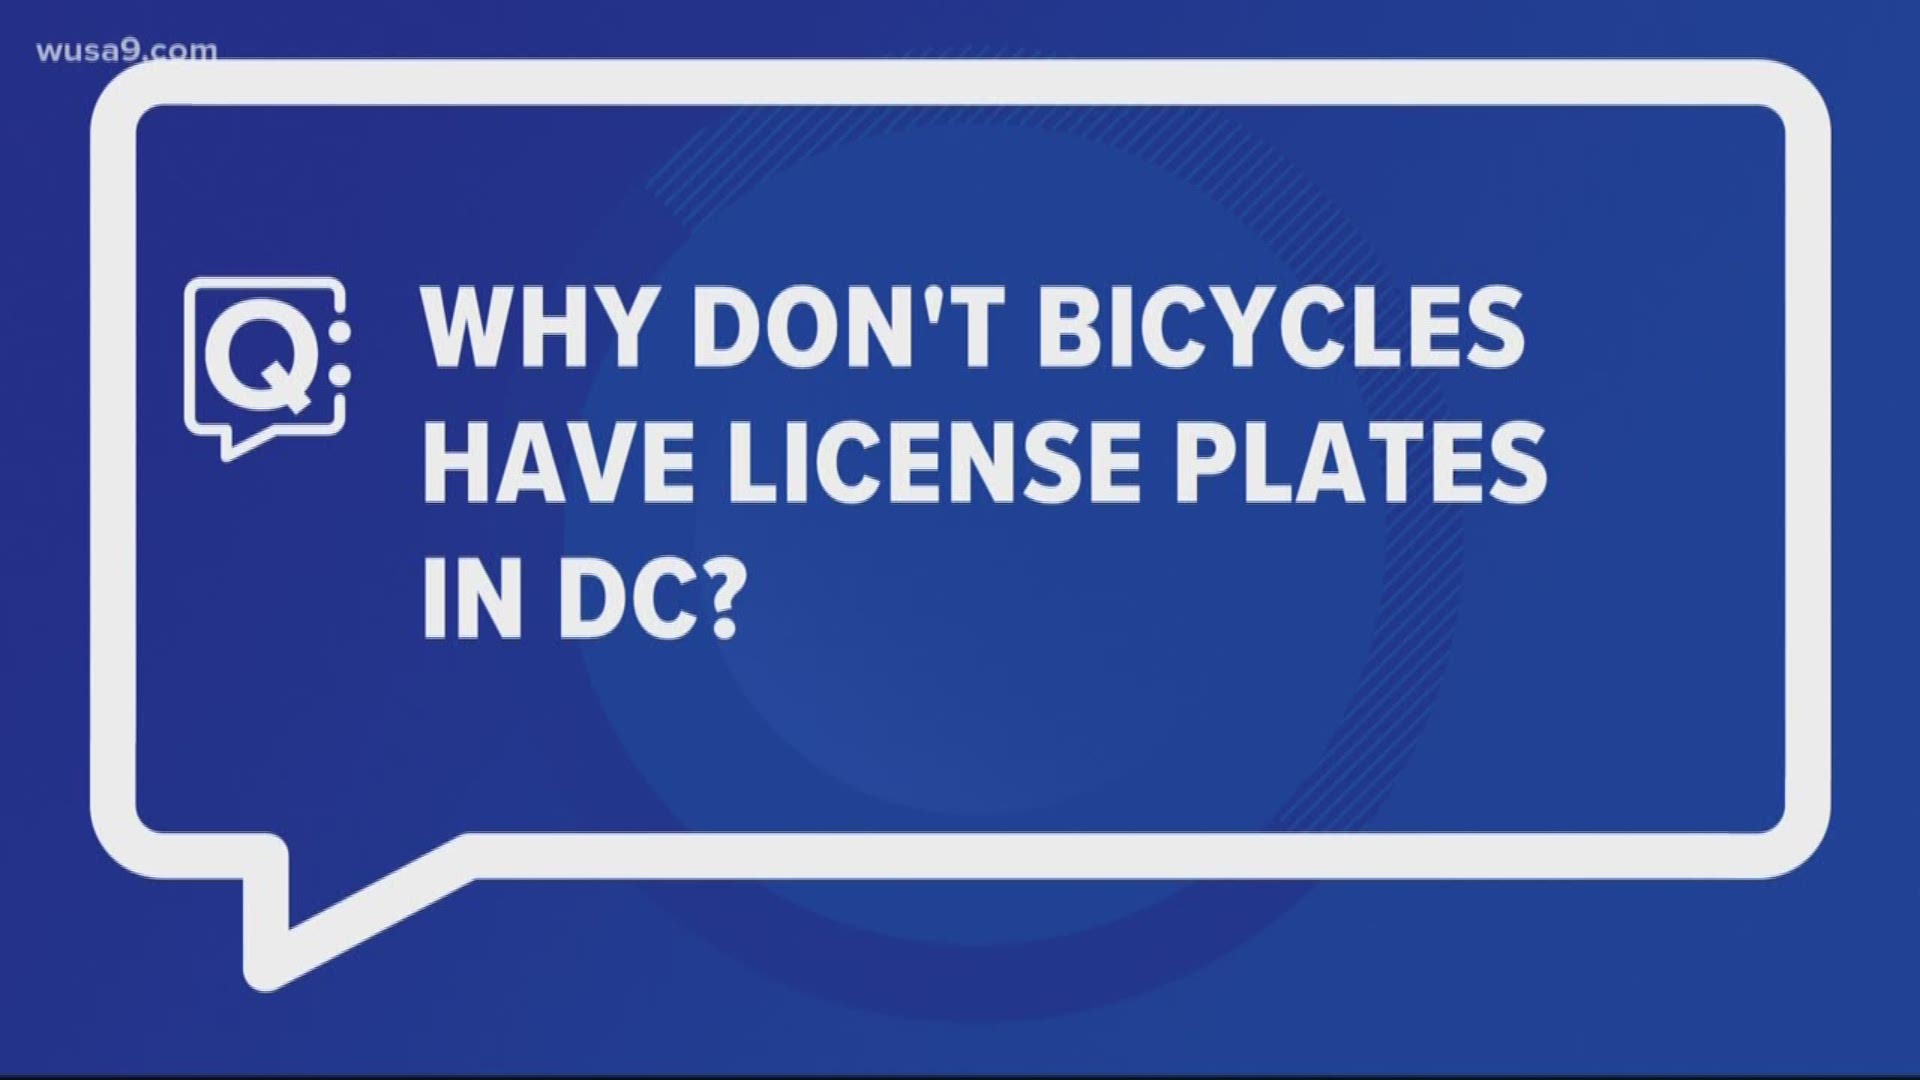 A special license plates edition of Quick Questions...why don't bicycles and USPS trucks have license plates?